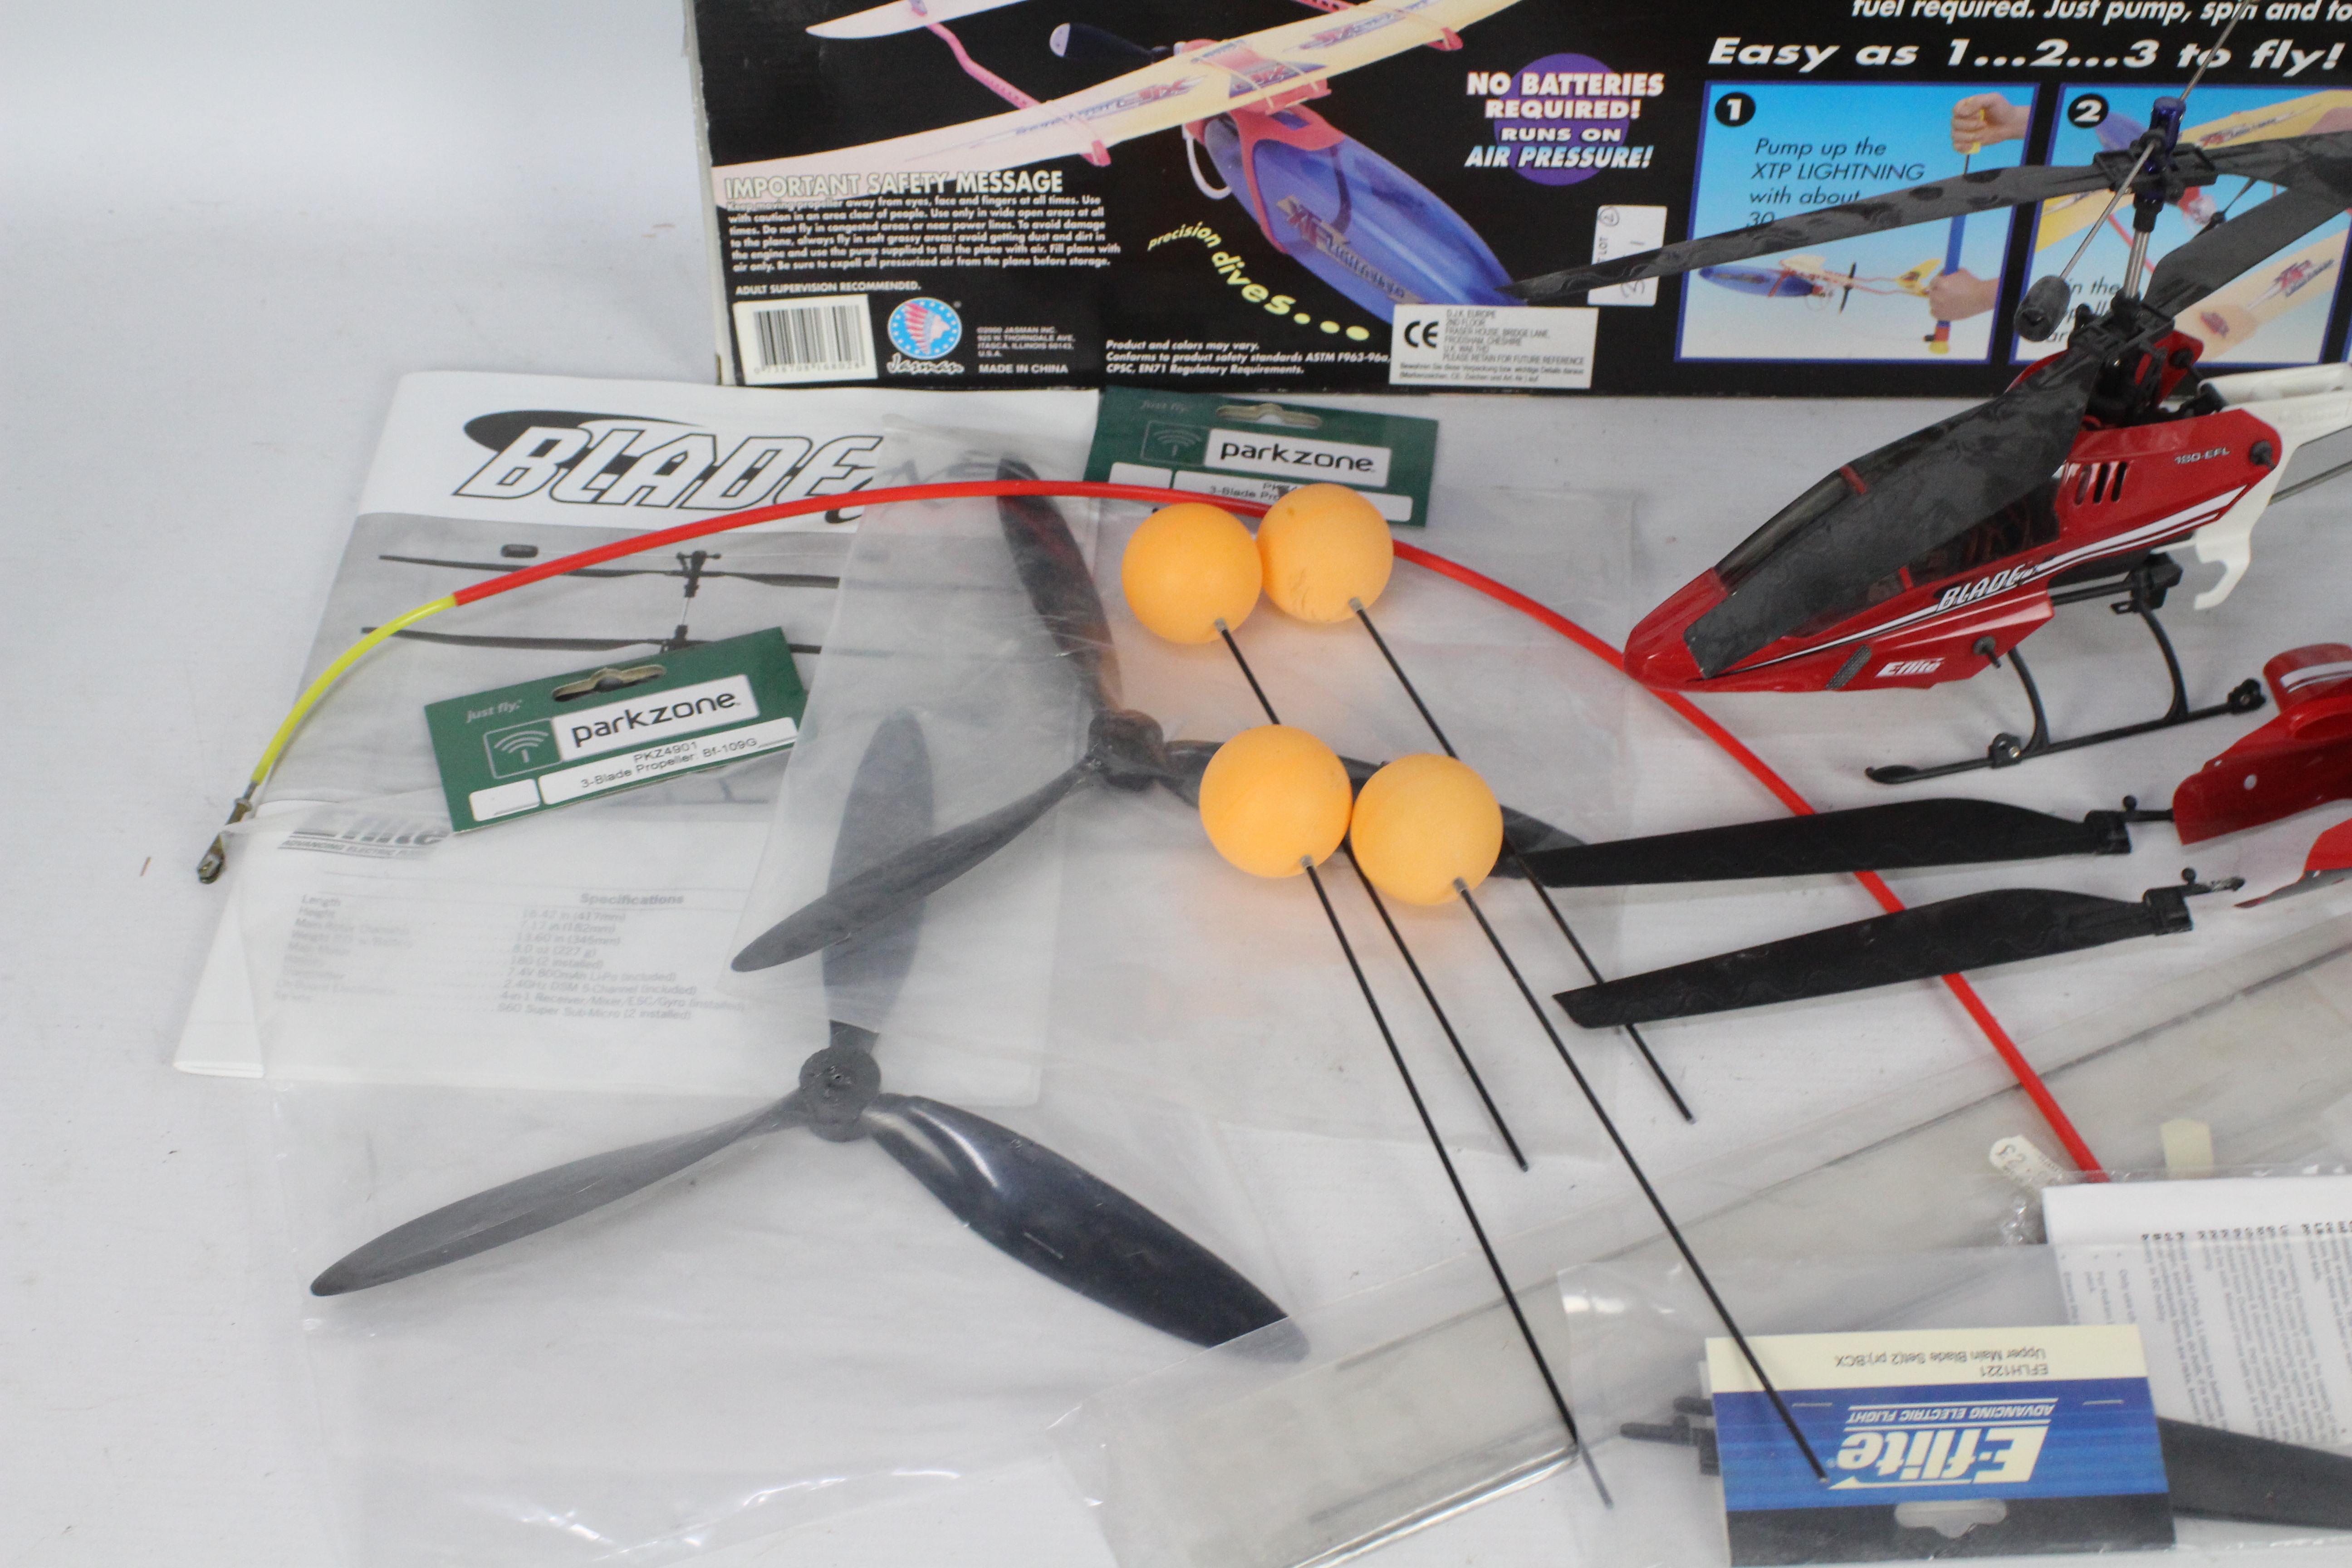 A mixed lot to contain an E-flite blade cx2 helicopter, 2 Parkzone 3-blade propellers, - Image 3 of 4